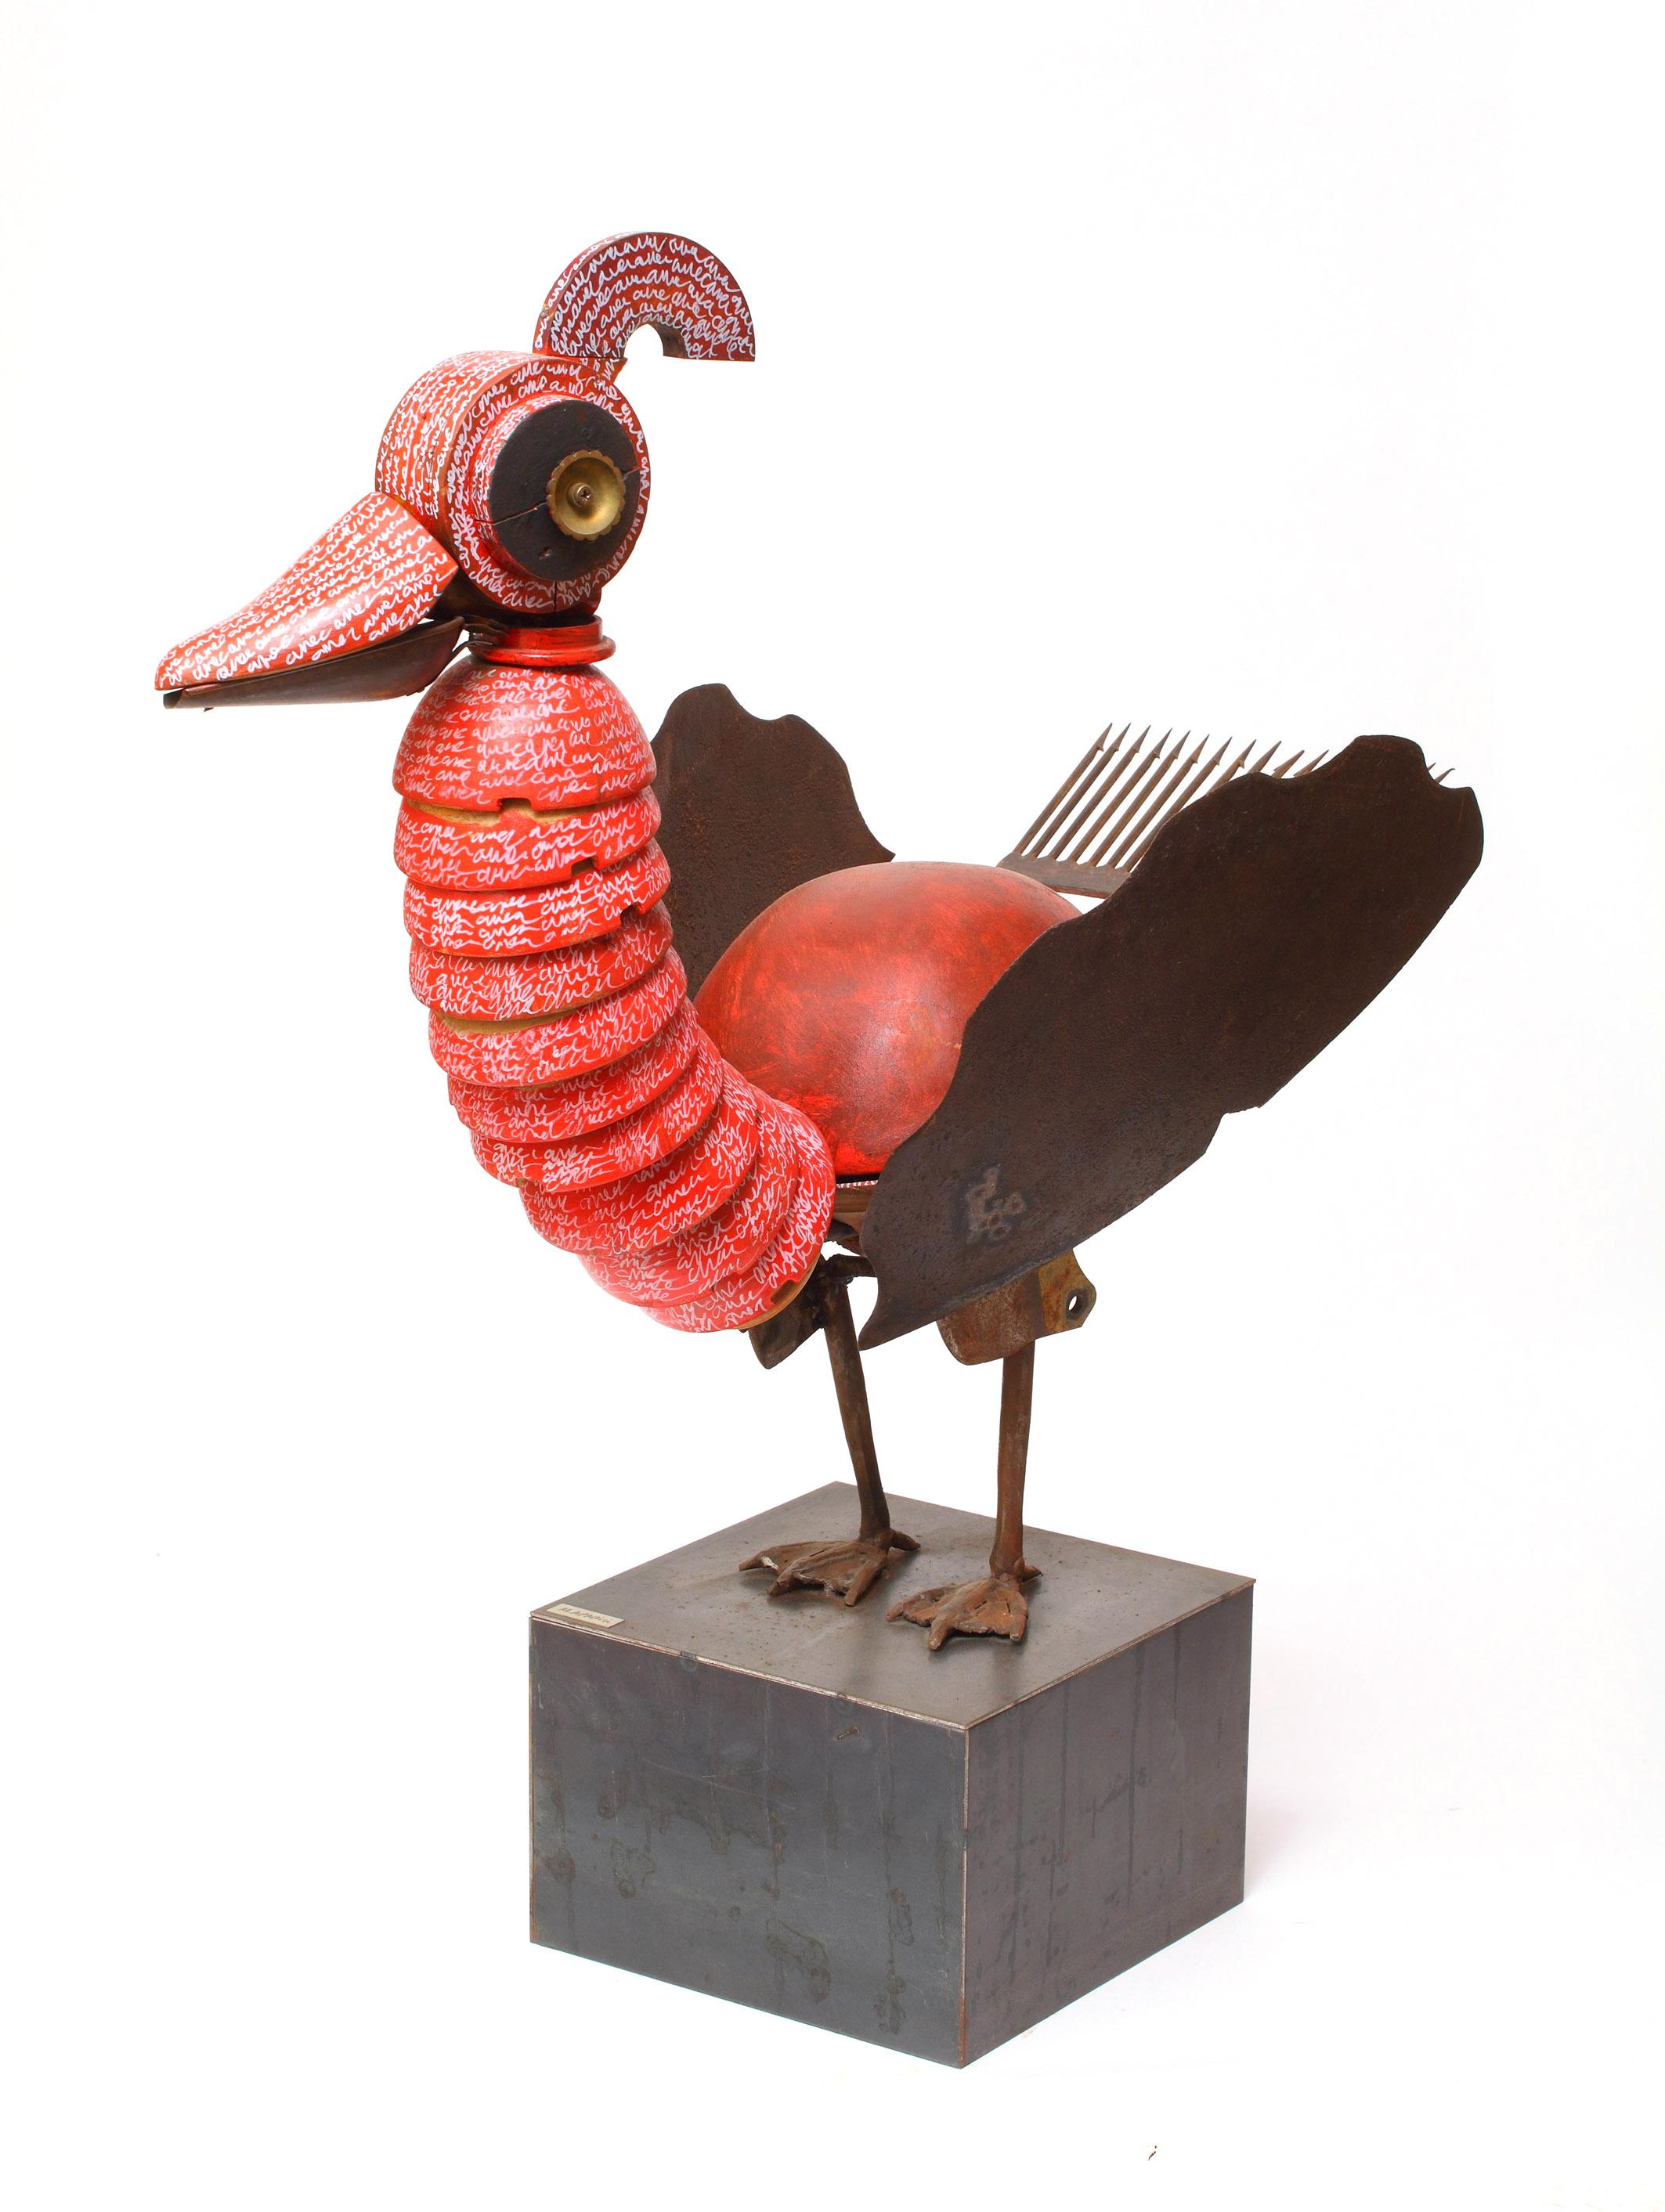 Pájaro Chino - 21st Cent, Contemporary Sculpture, Figurative, Recycled Objects